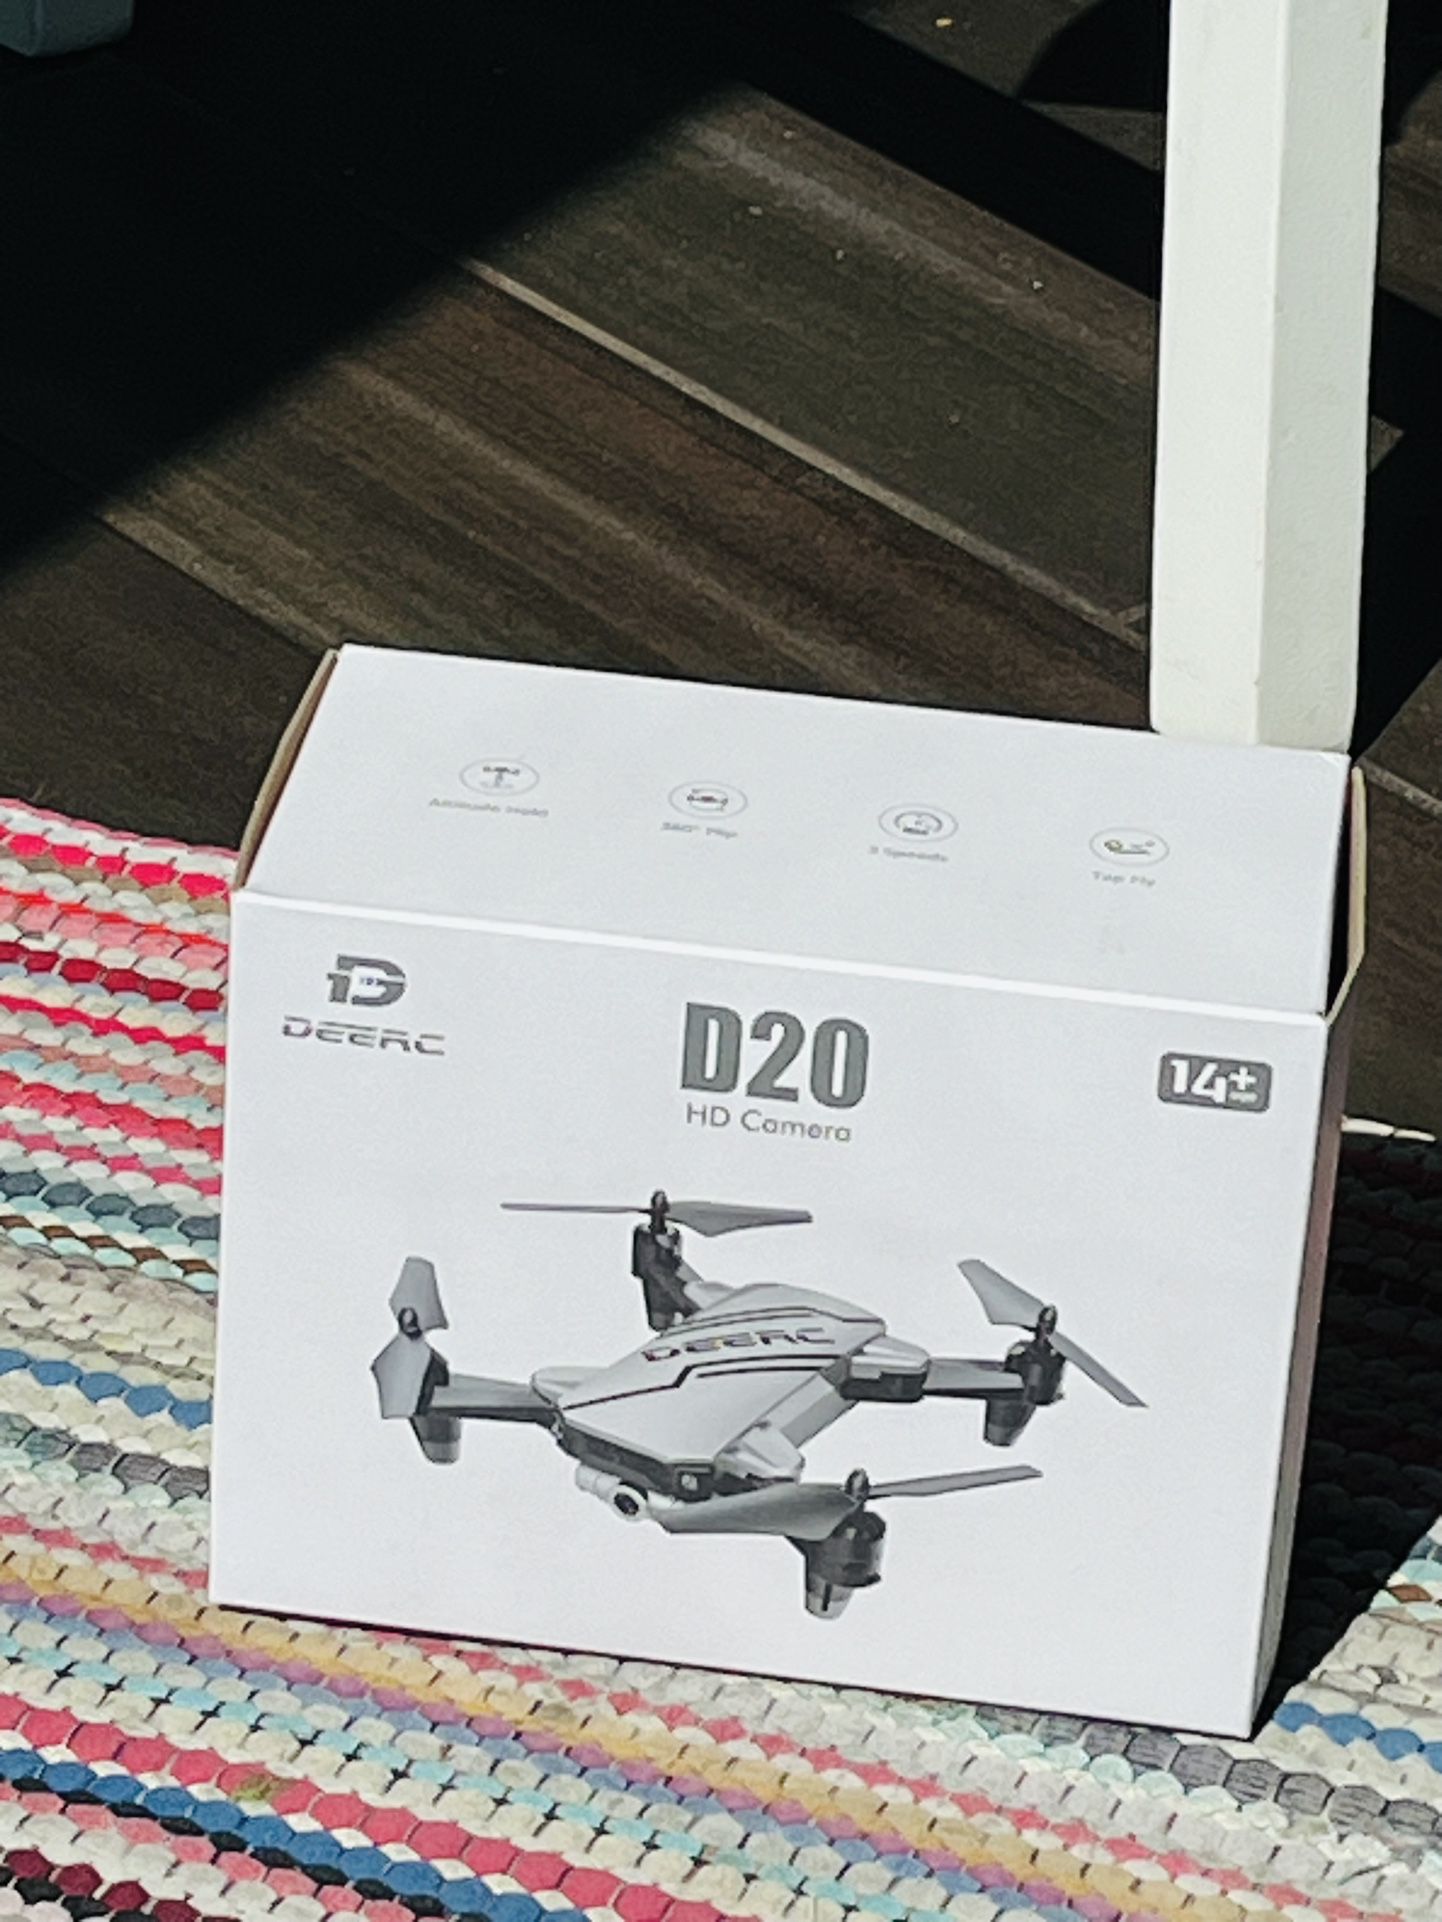 Brand New DEERC D20 Mini Drone for Kids with 720P HD FPV Camera Remote Control Toys Gifts for Boys Girls with Altitude Hold, Headless Mode, One Key St